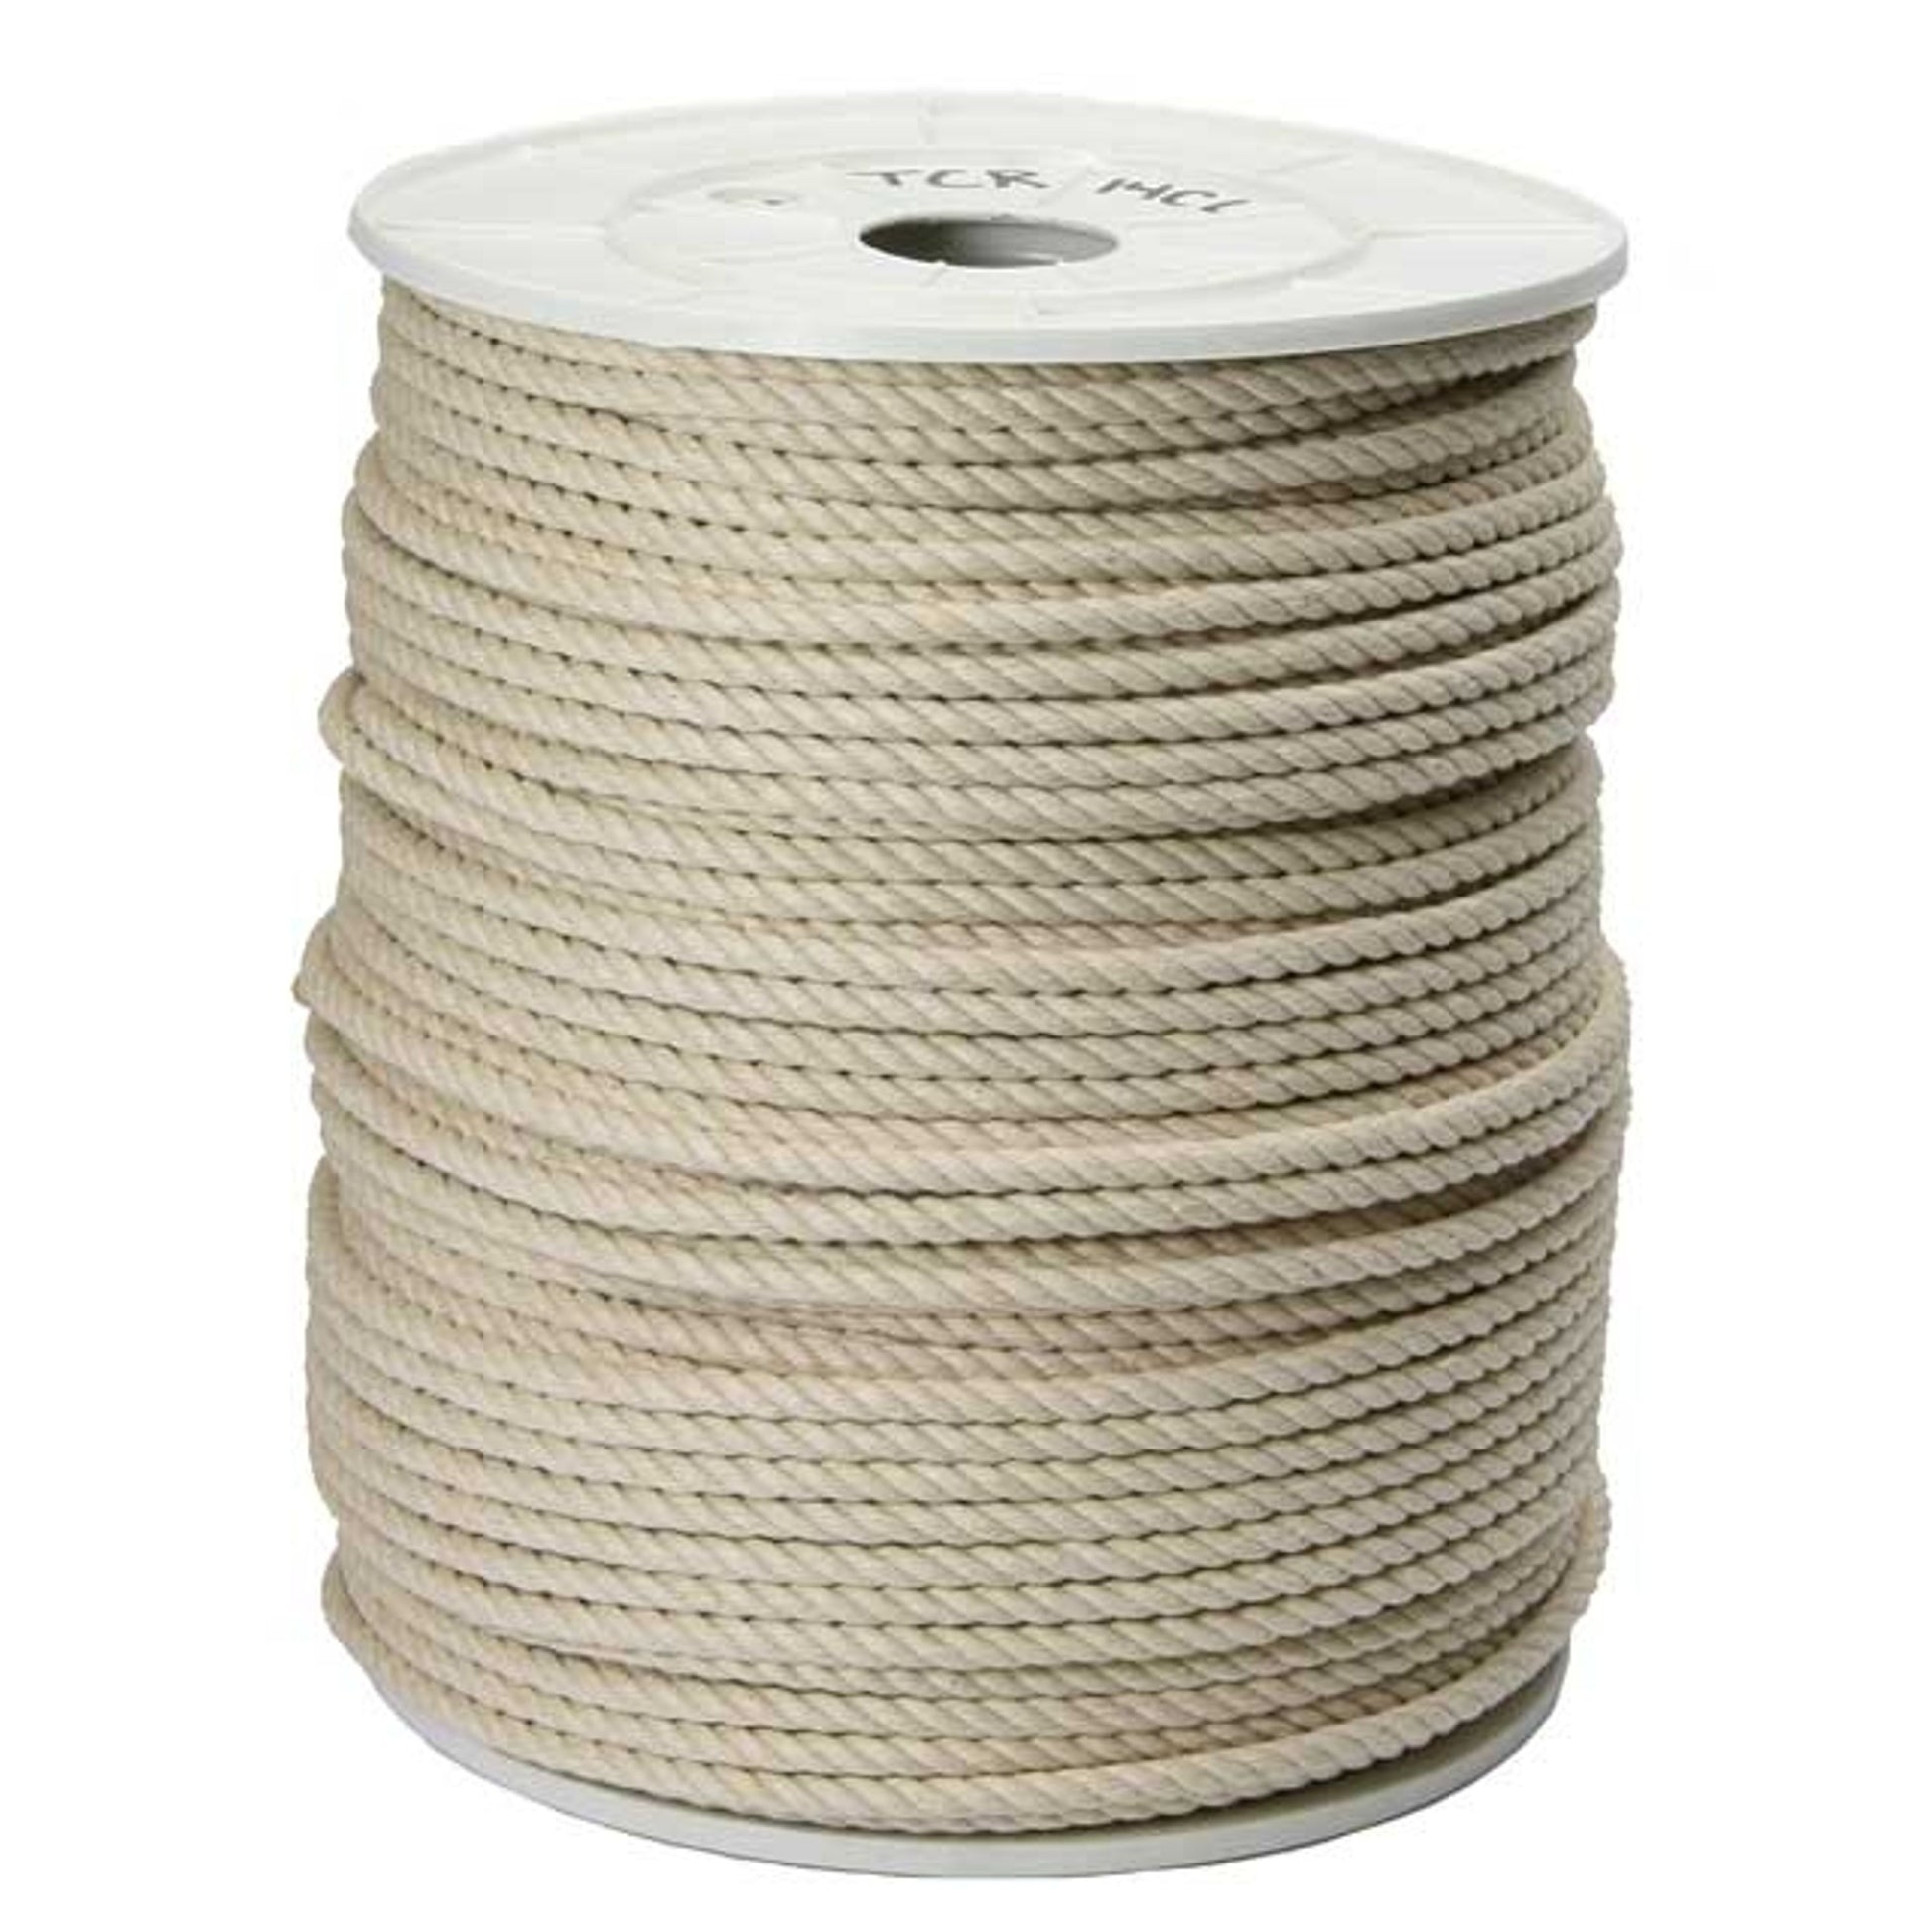 1/4 Inch Twisted Cotton Rope - Grass Green